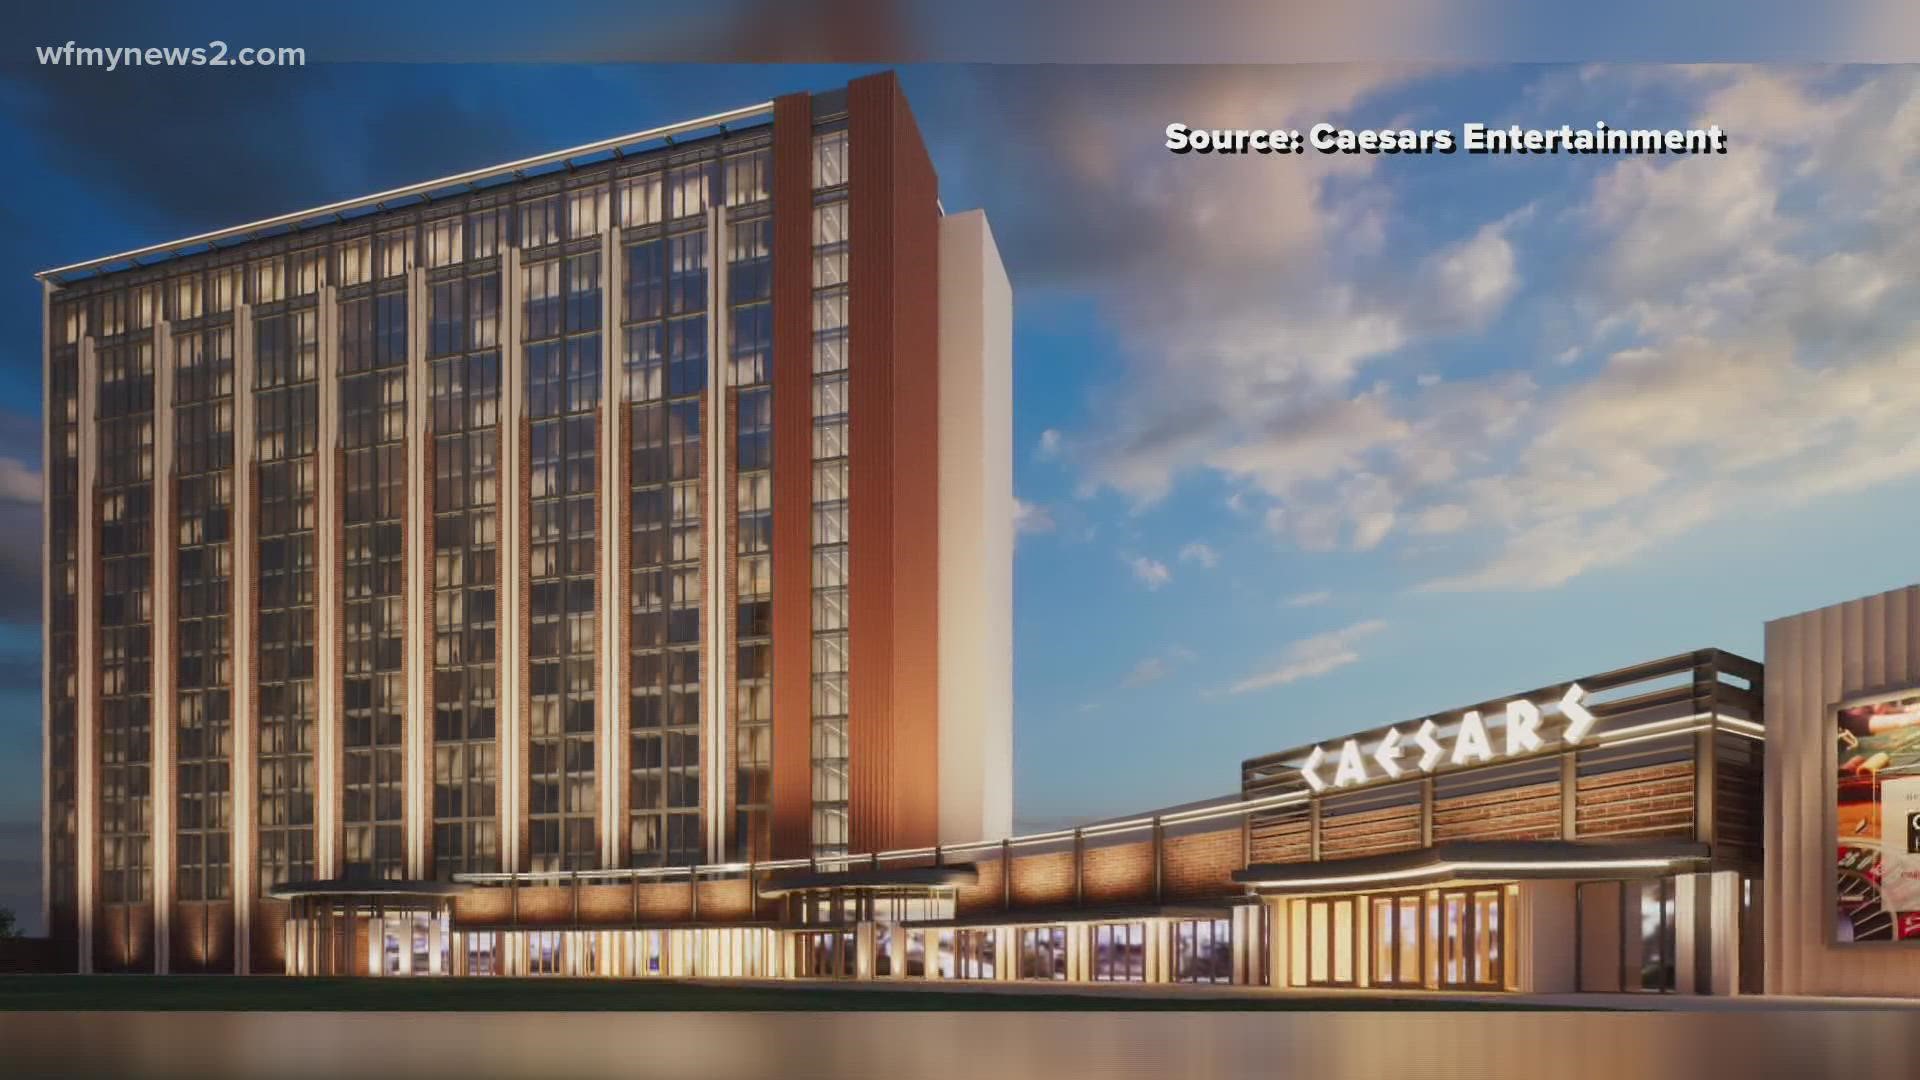 The casino is set to hire hundreds of people and bring in $38 million in new tax revenue.